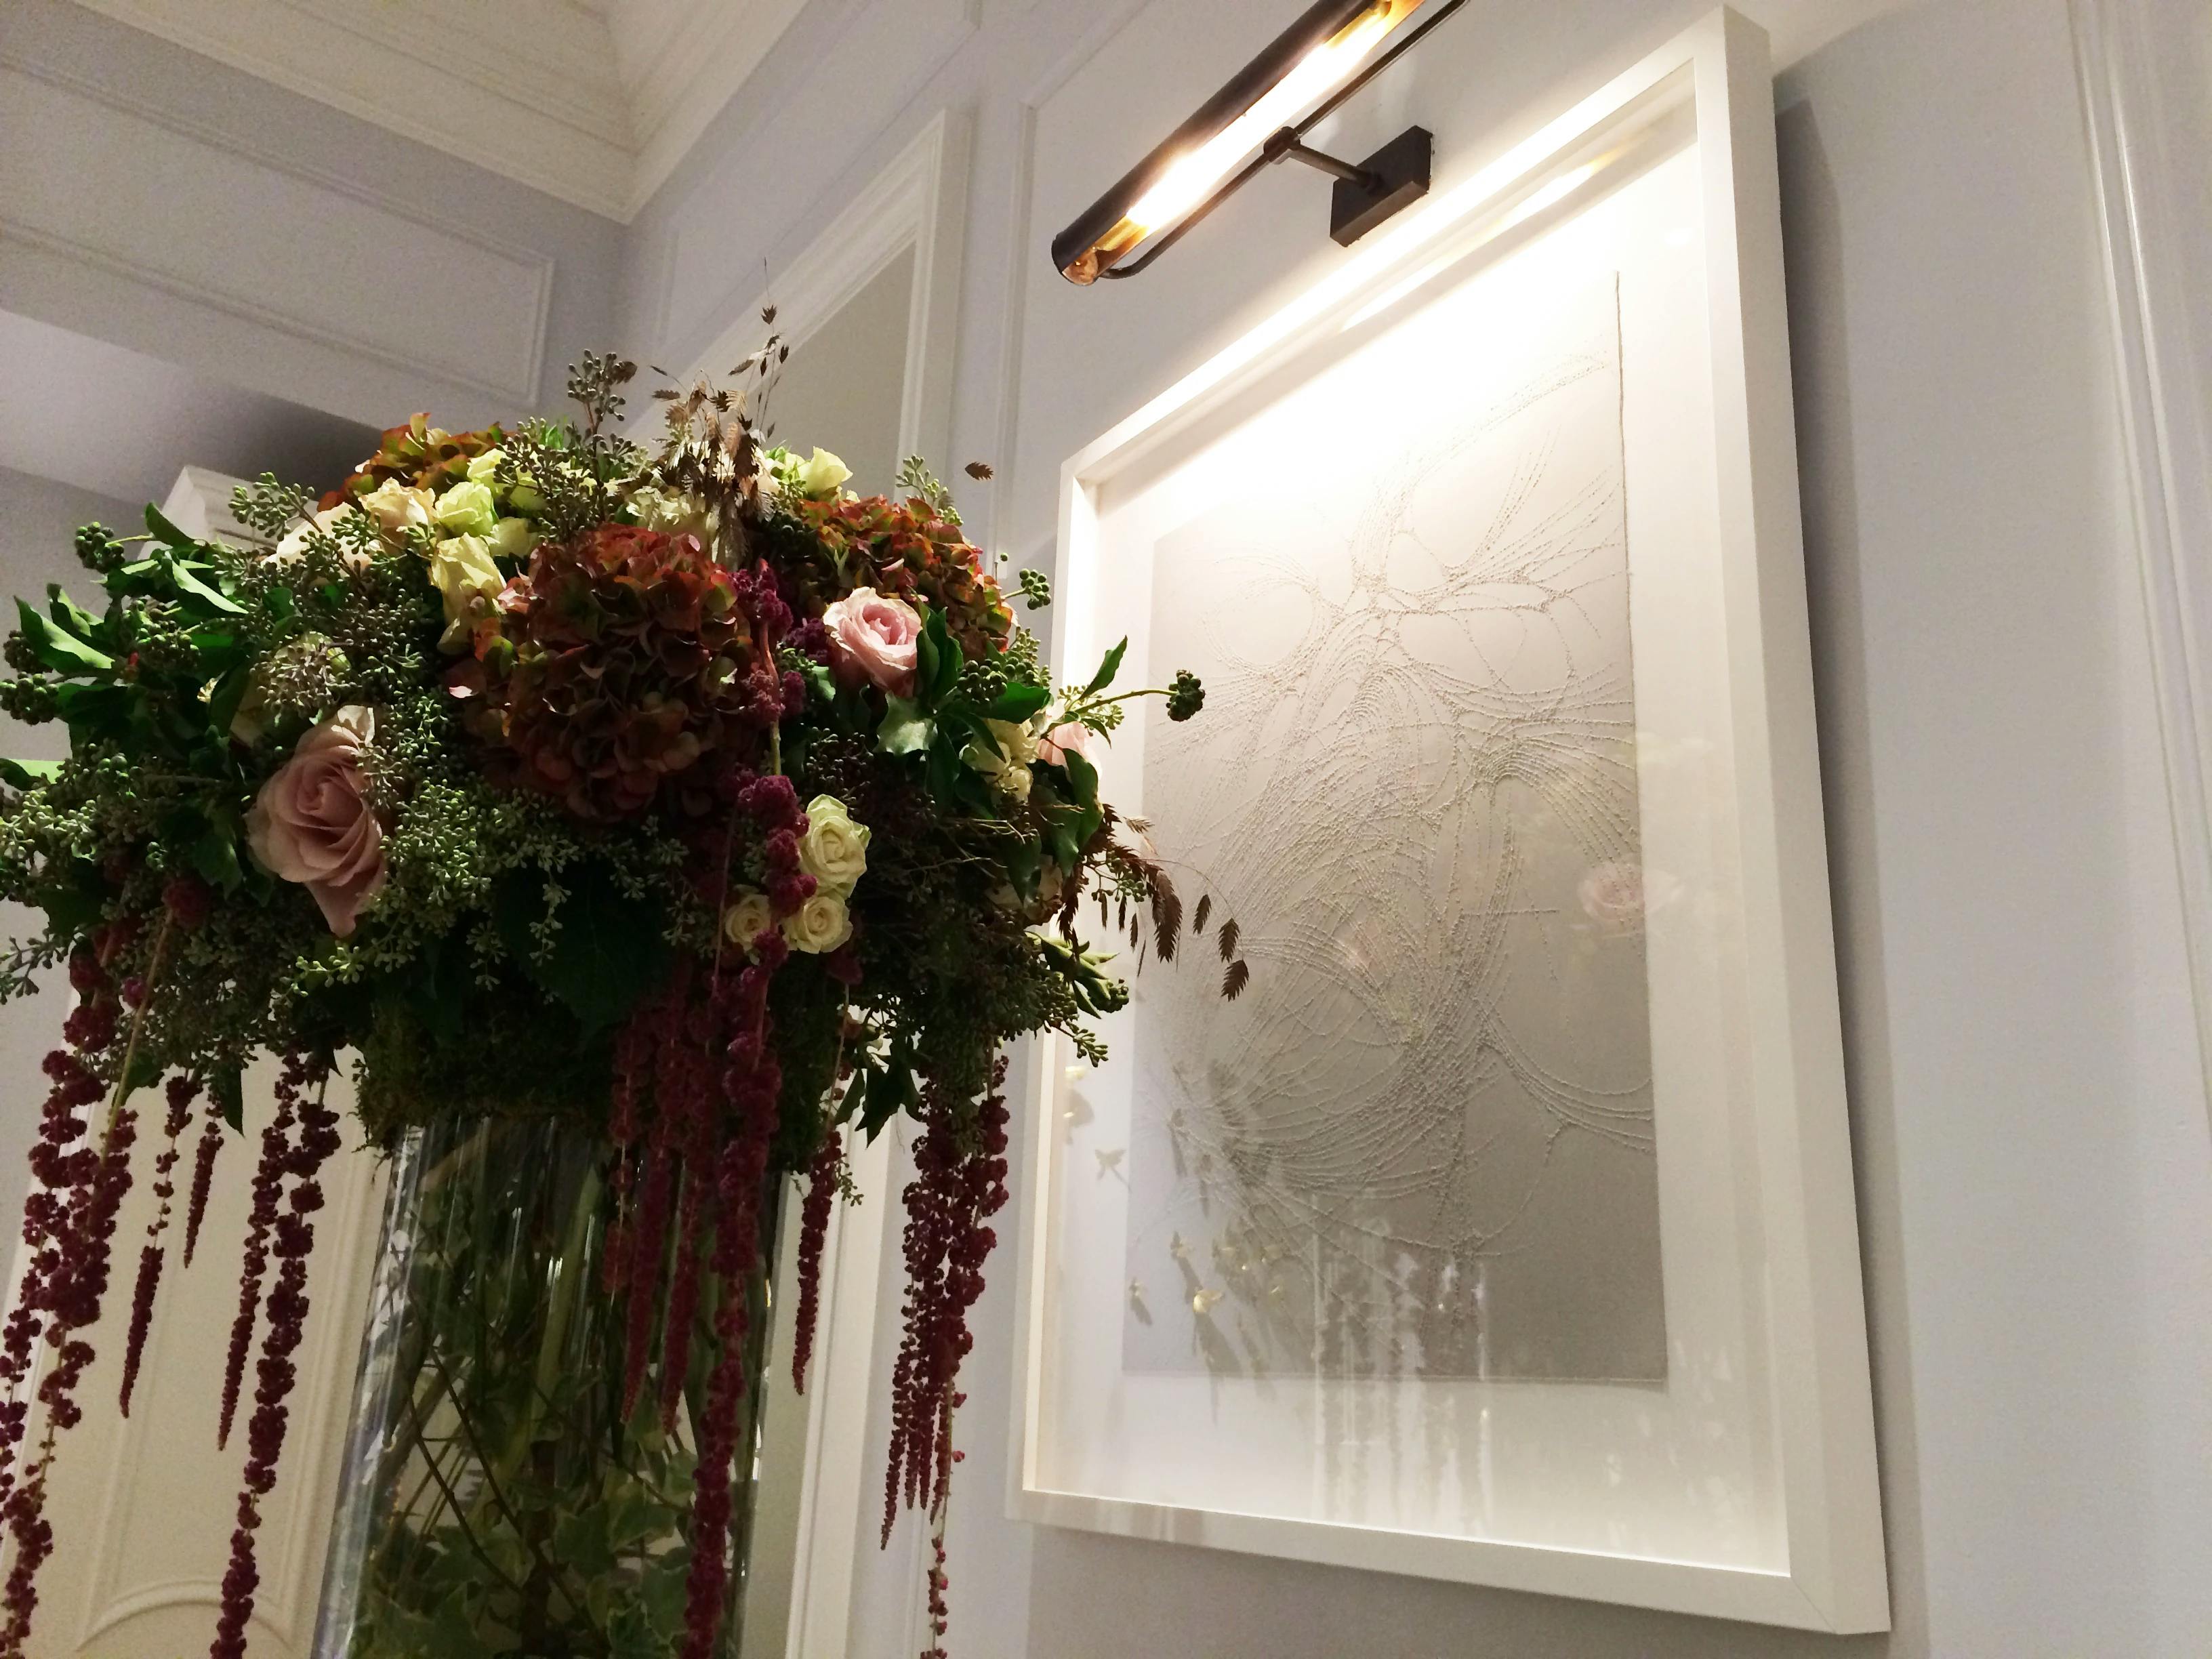 A framed artwork with carved, interlacing lines by artist Colleen Ho on a gray wall next to a large bouquet of cascading flowers.